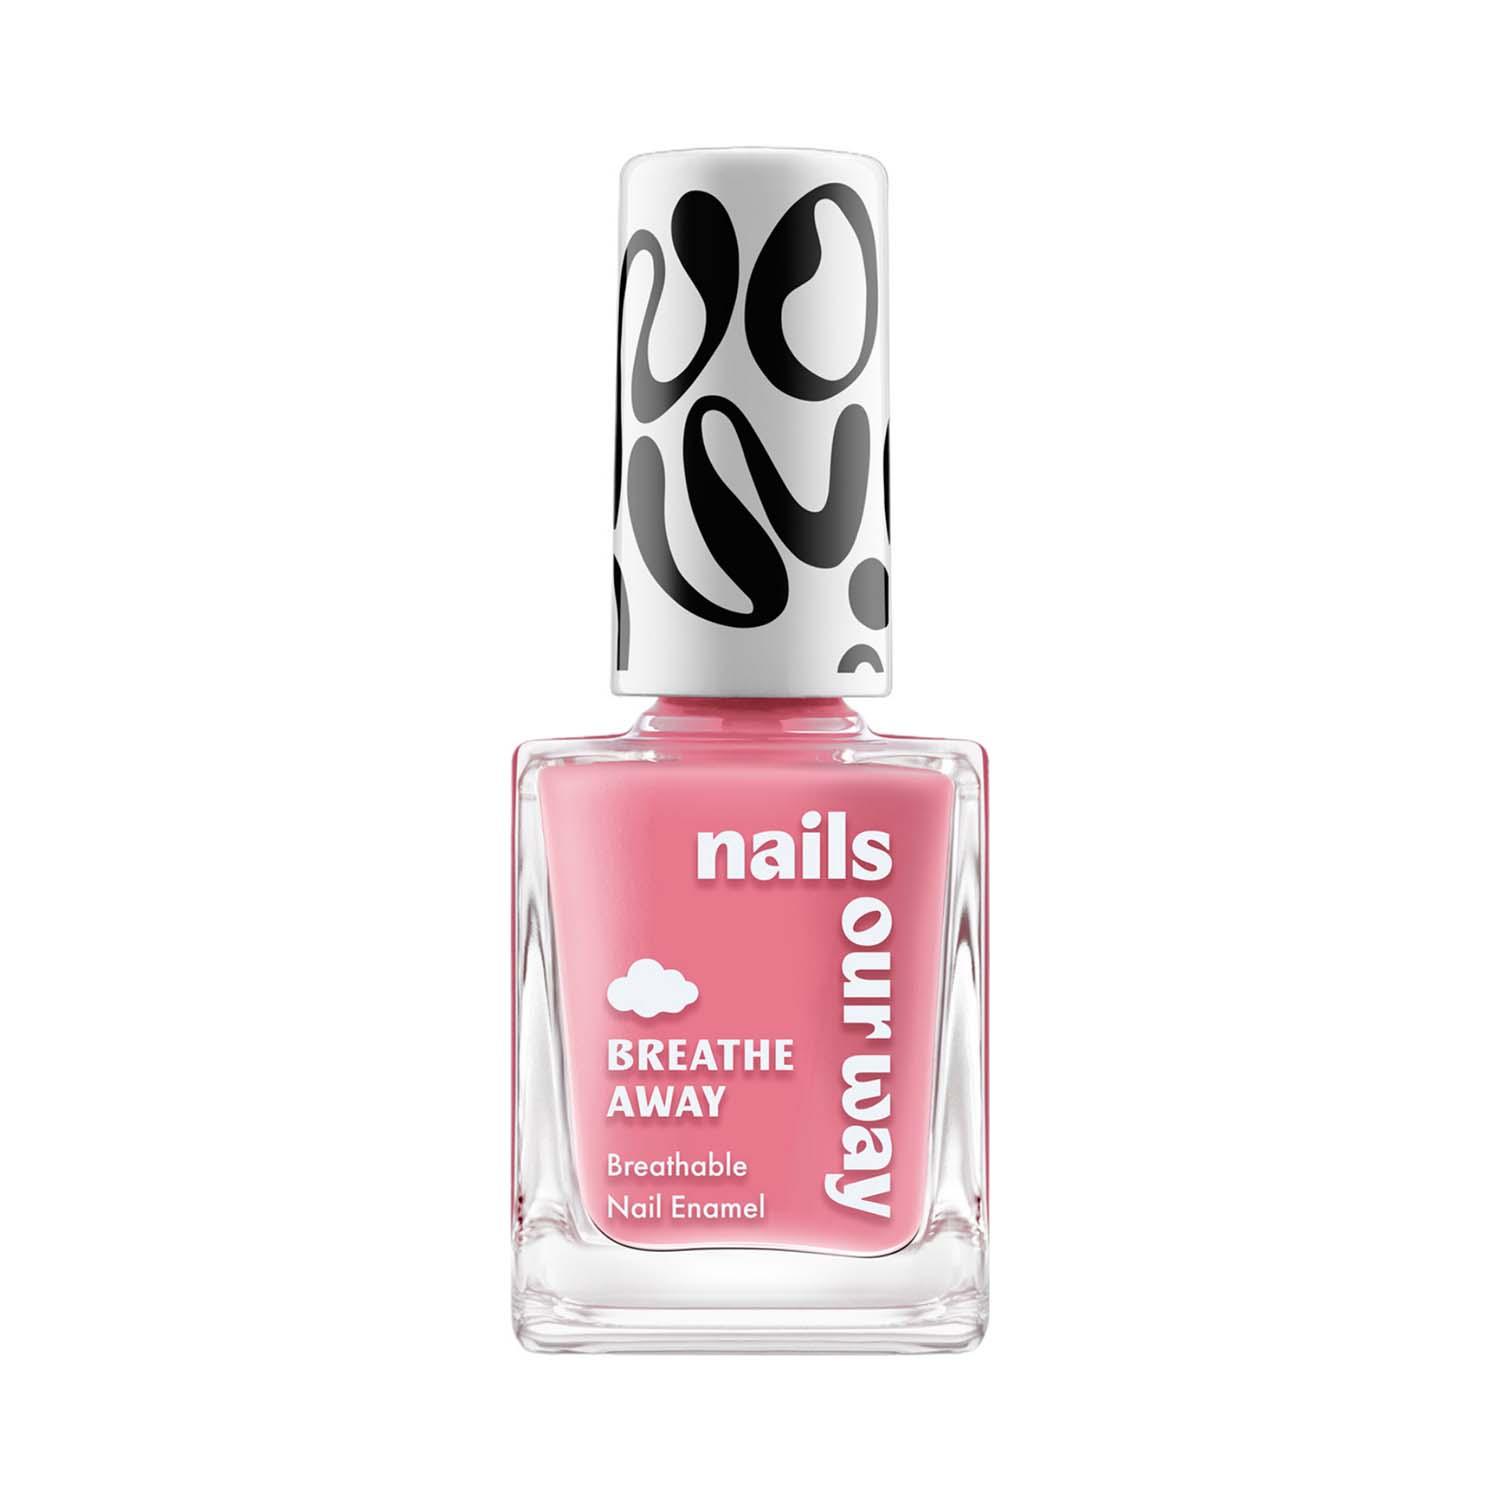 Nails Our Way | Nails Our Way Breathe Away Nail Enamel - Peony (10 ml)